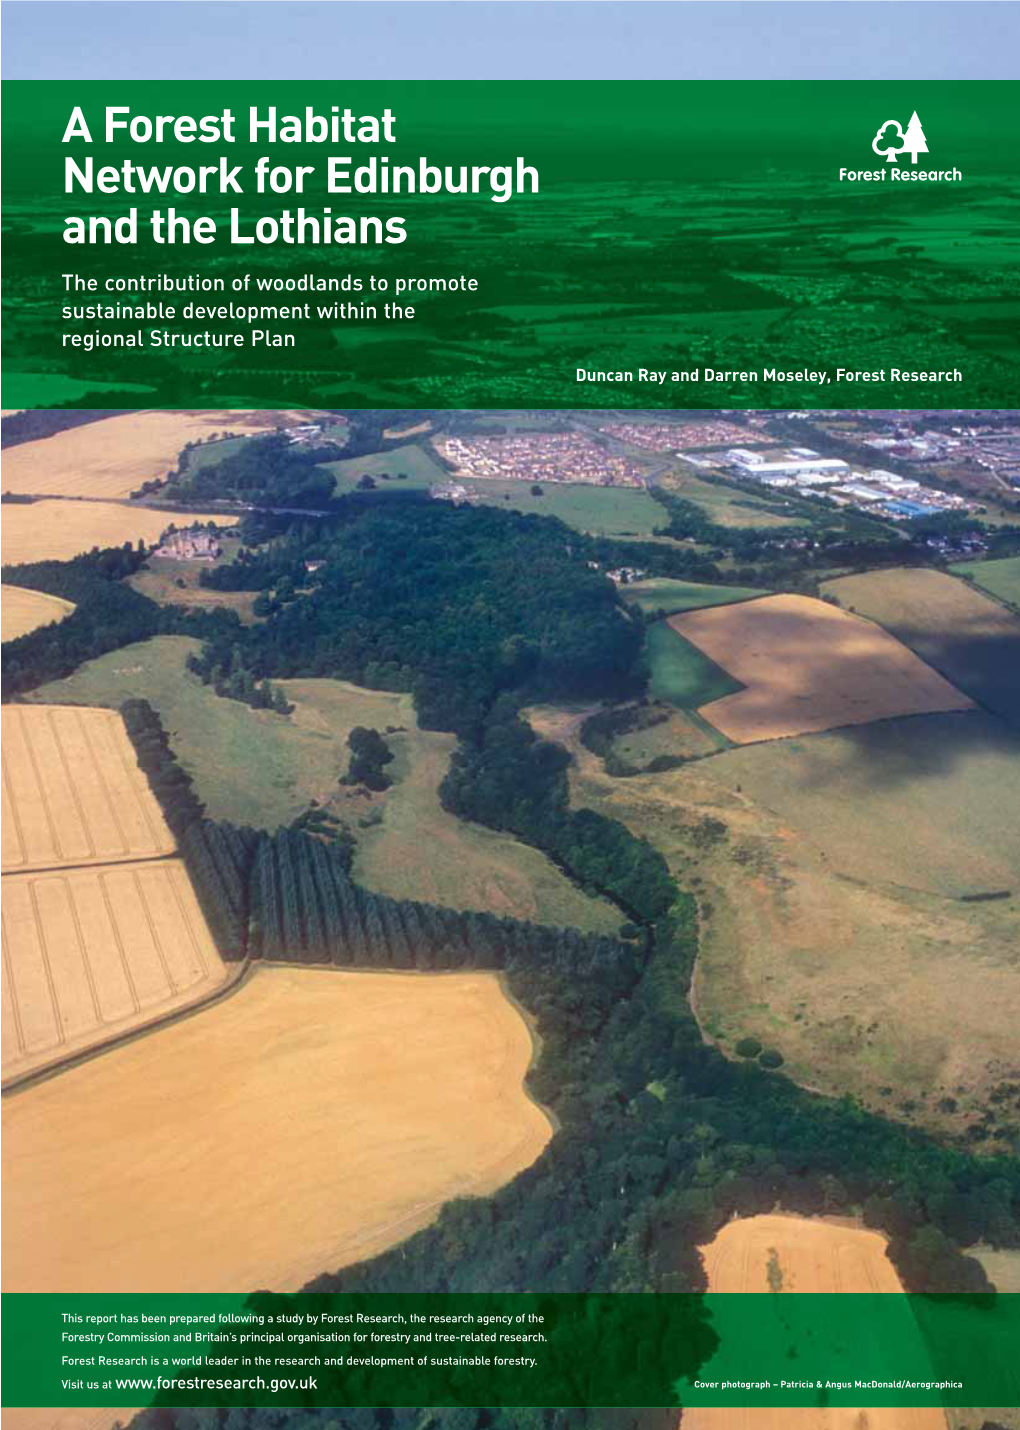 A Forest Habitat Network for Edinburgh and the Lothians the Contribution of Woodlands to Promote Sustainable Development Within the Regional Structure Plan